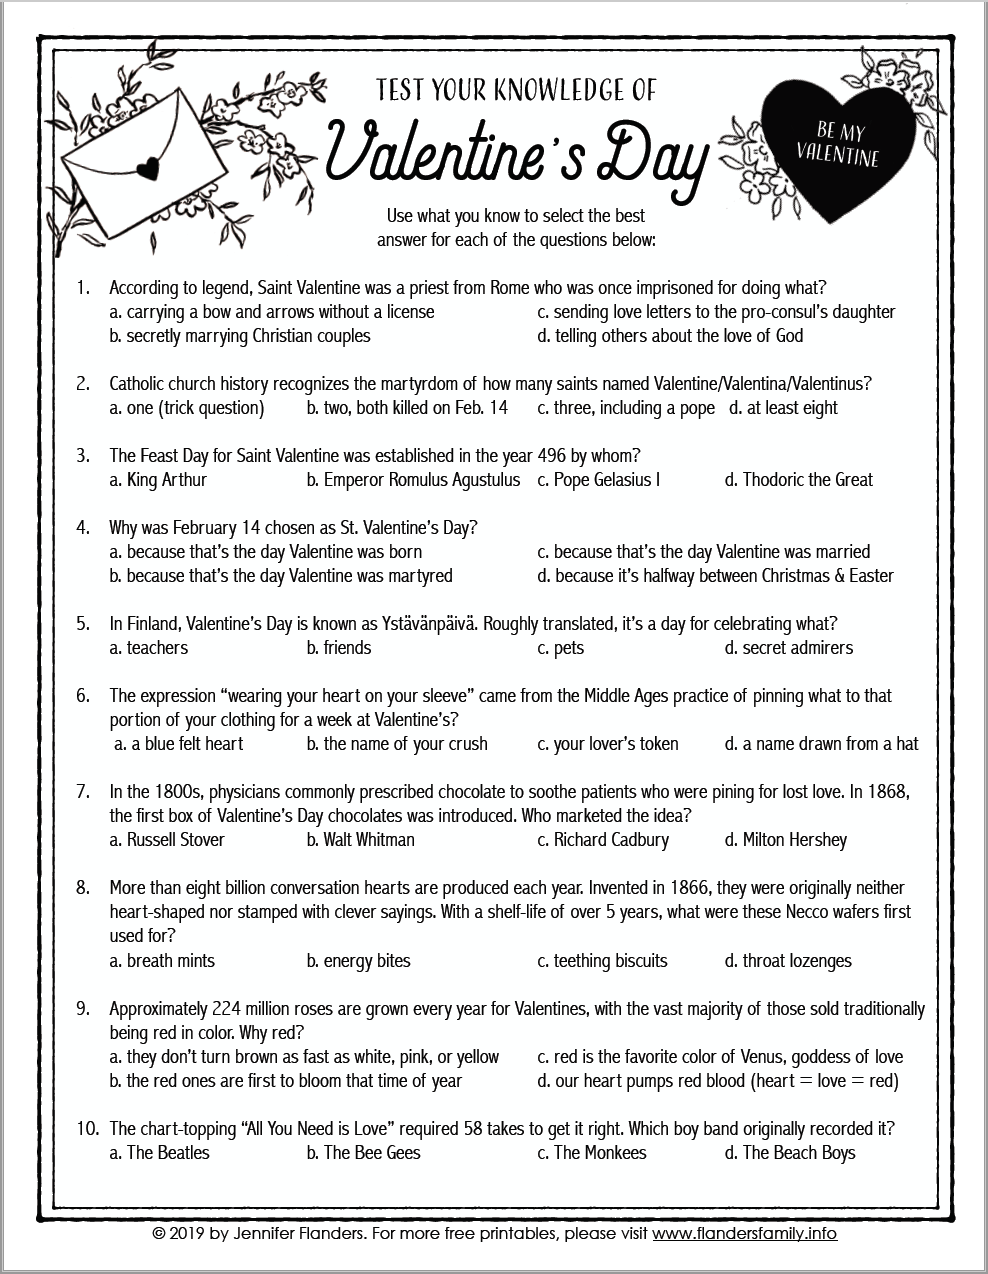 valentine-s-day-quiz-free-printable-flanders-family-home-life